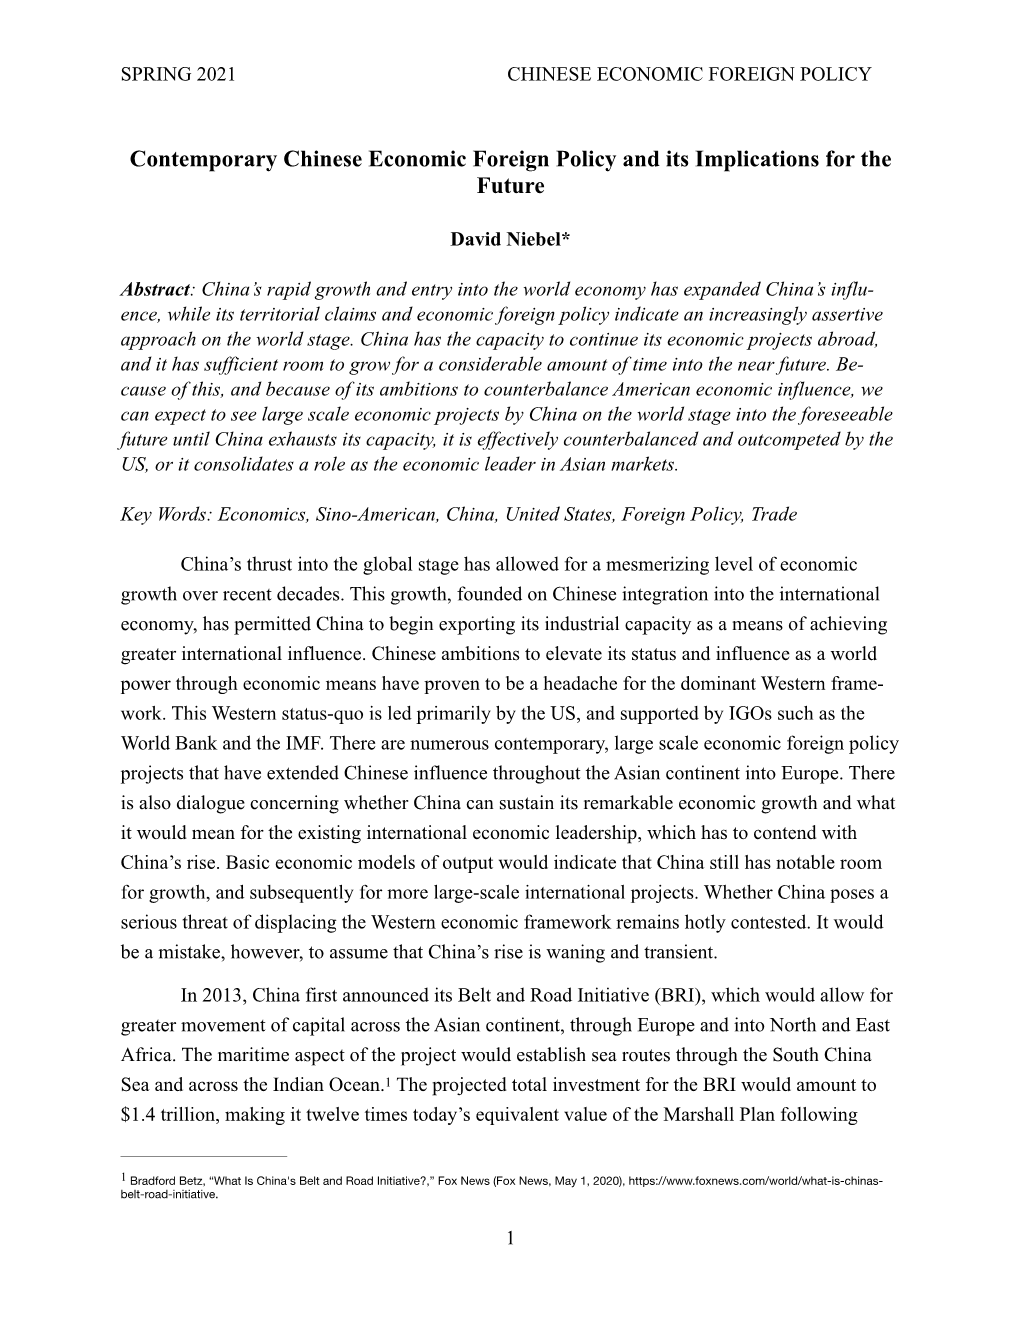 Contemporary Chinese Economic Foreign Policy and Its Implications for the Future